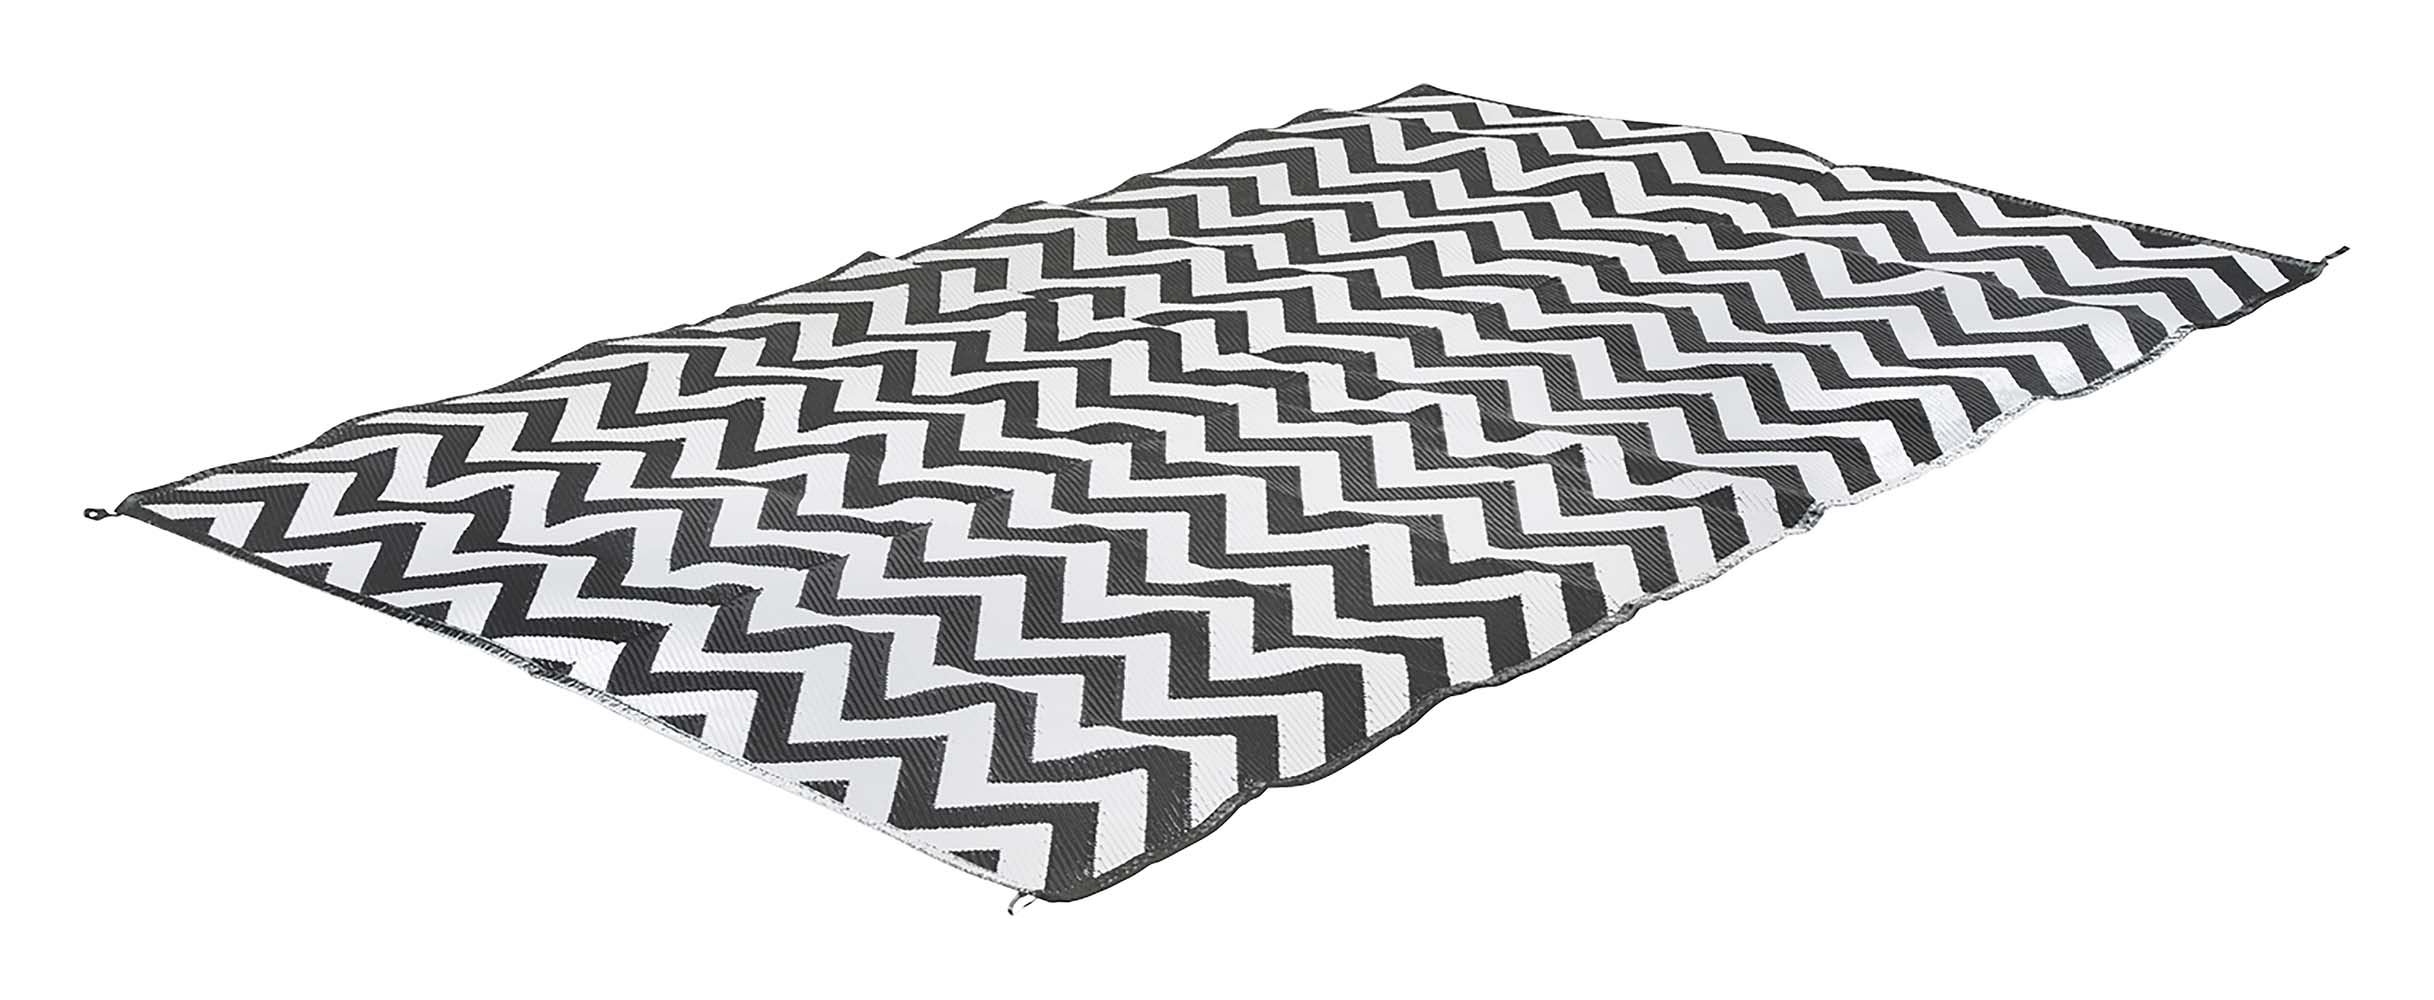 4271016 Bo-Camp - Urban Outdoor collection - Chill mat - Wave - Polypropylene - Black/White - M